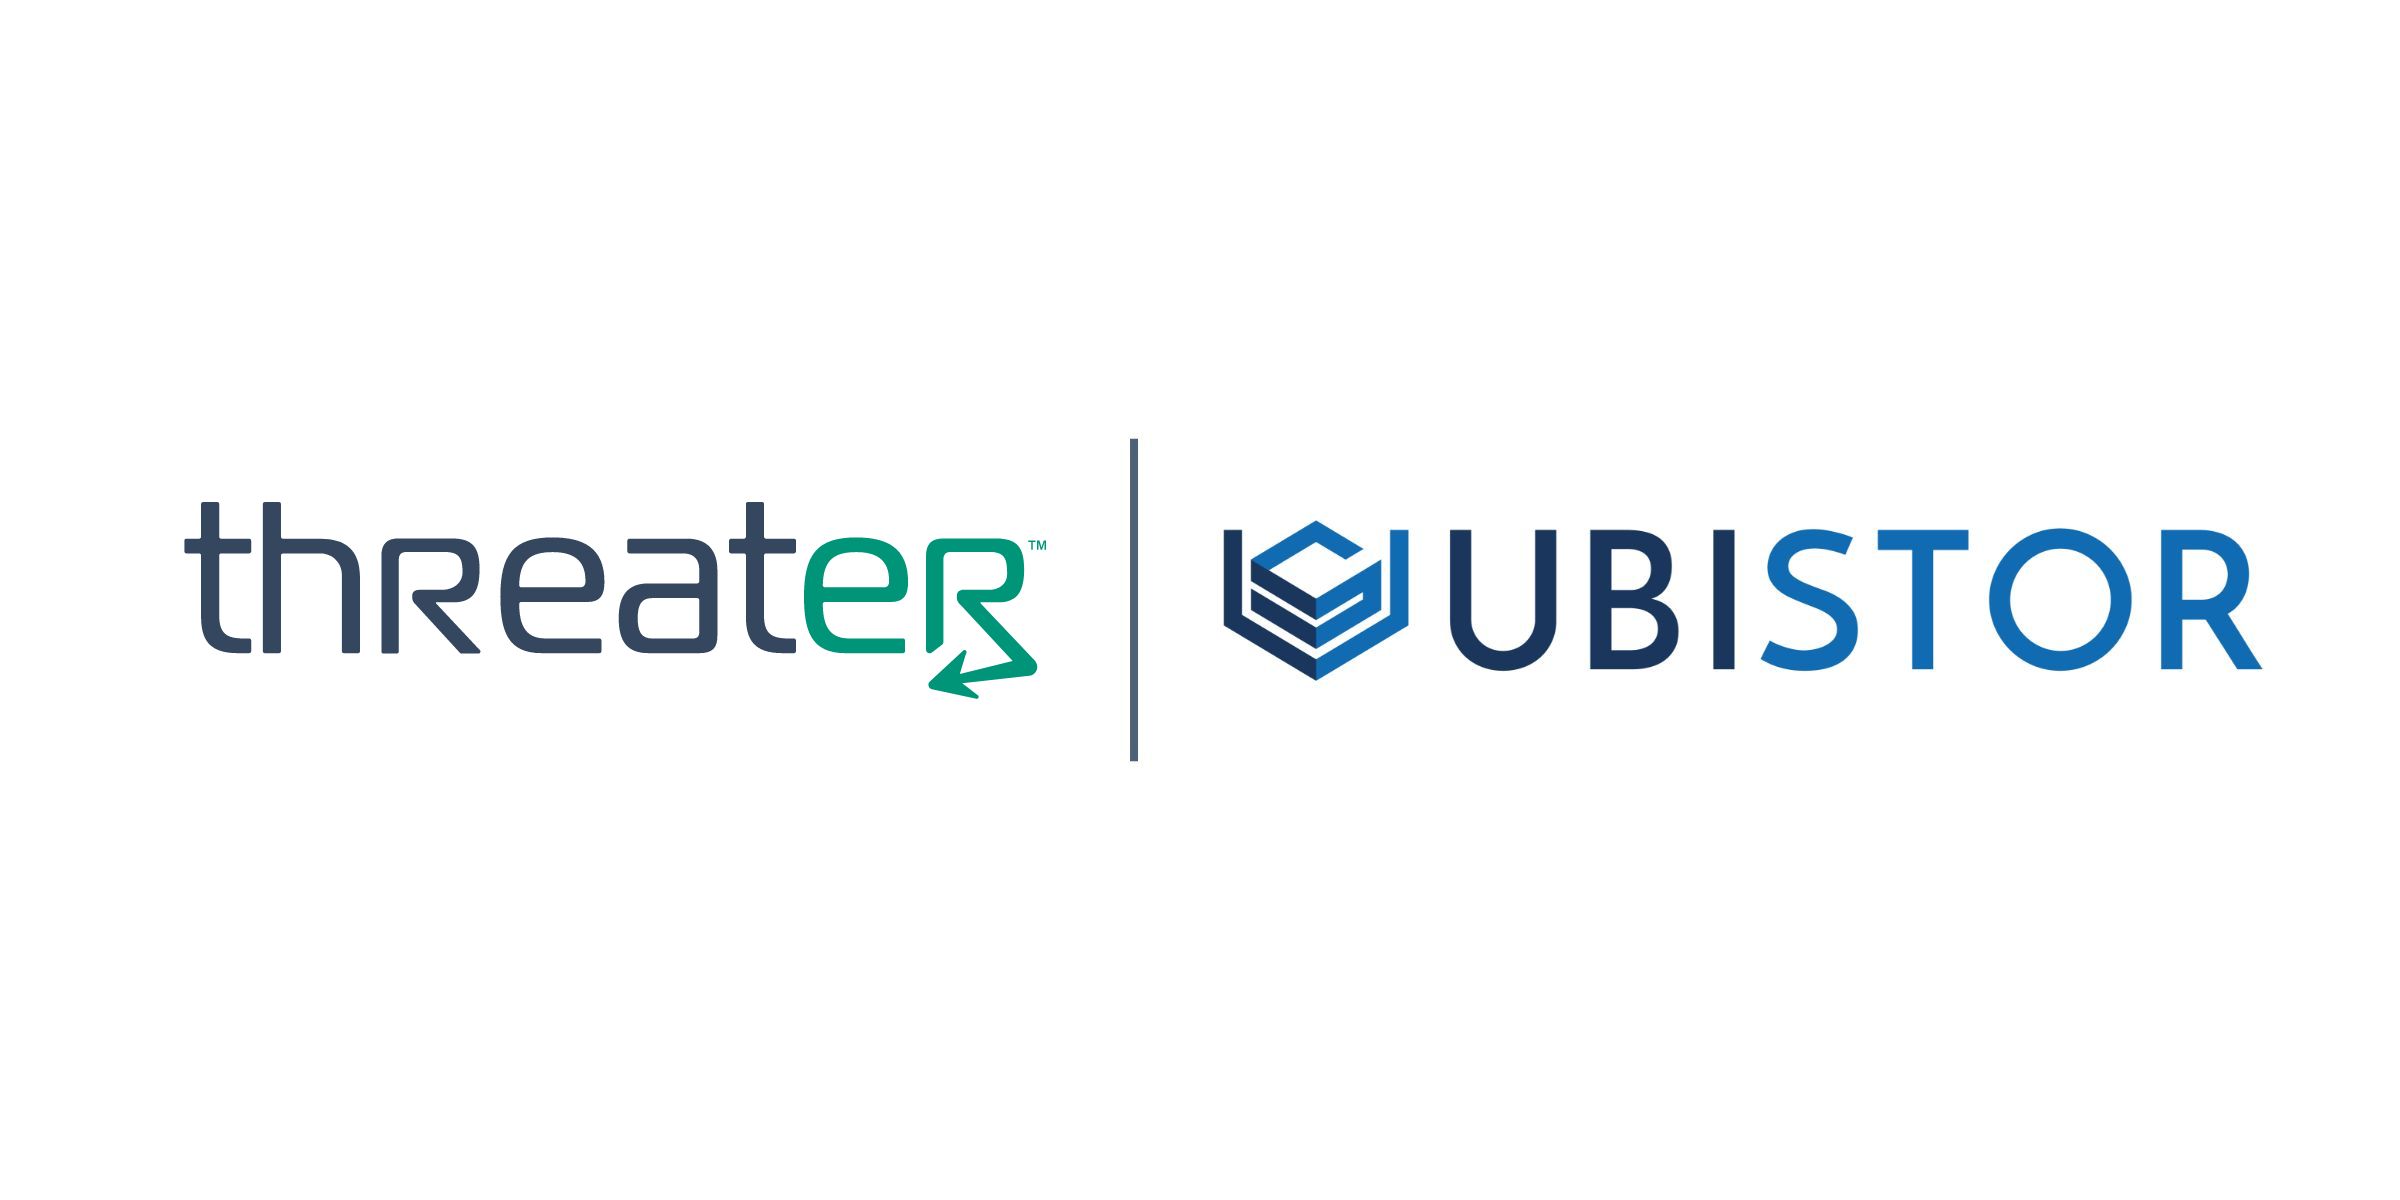 Colored Threater and UbiStor logos